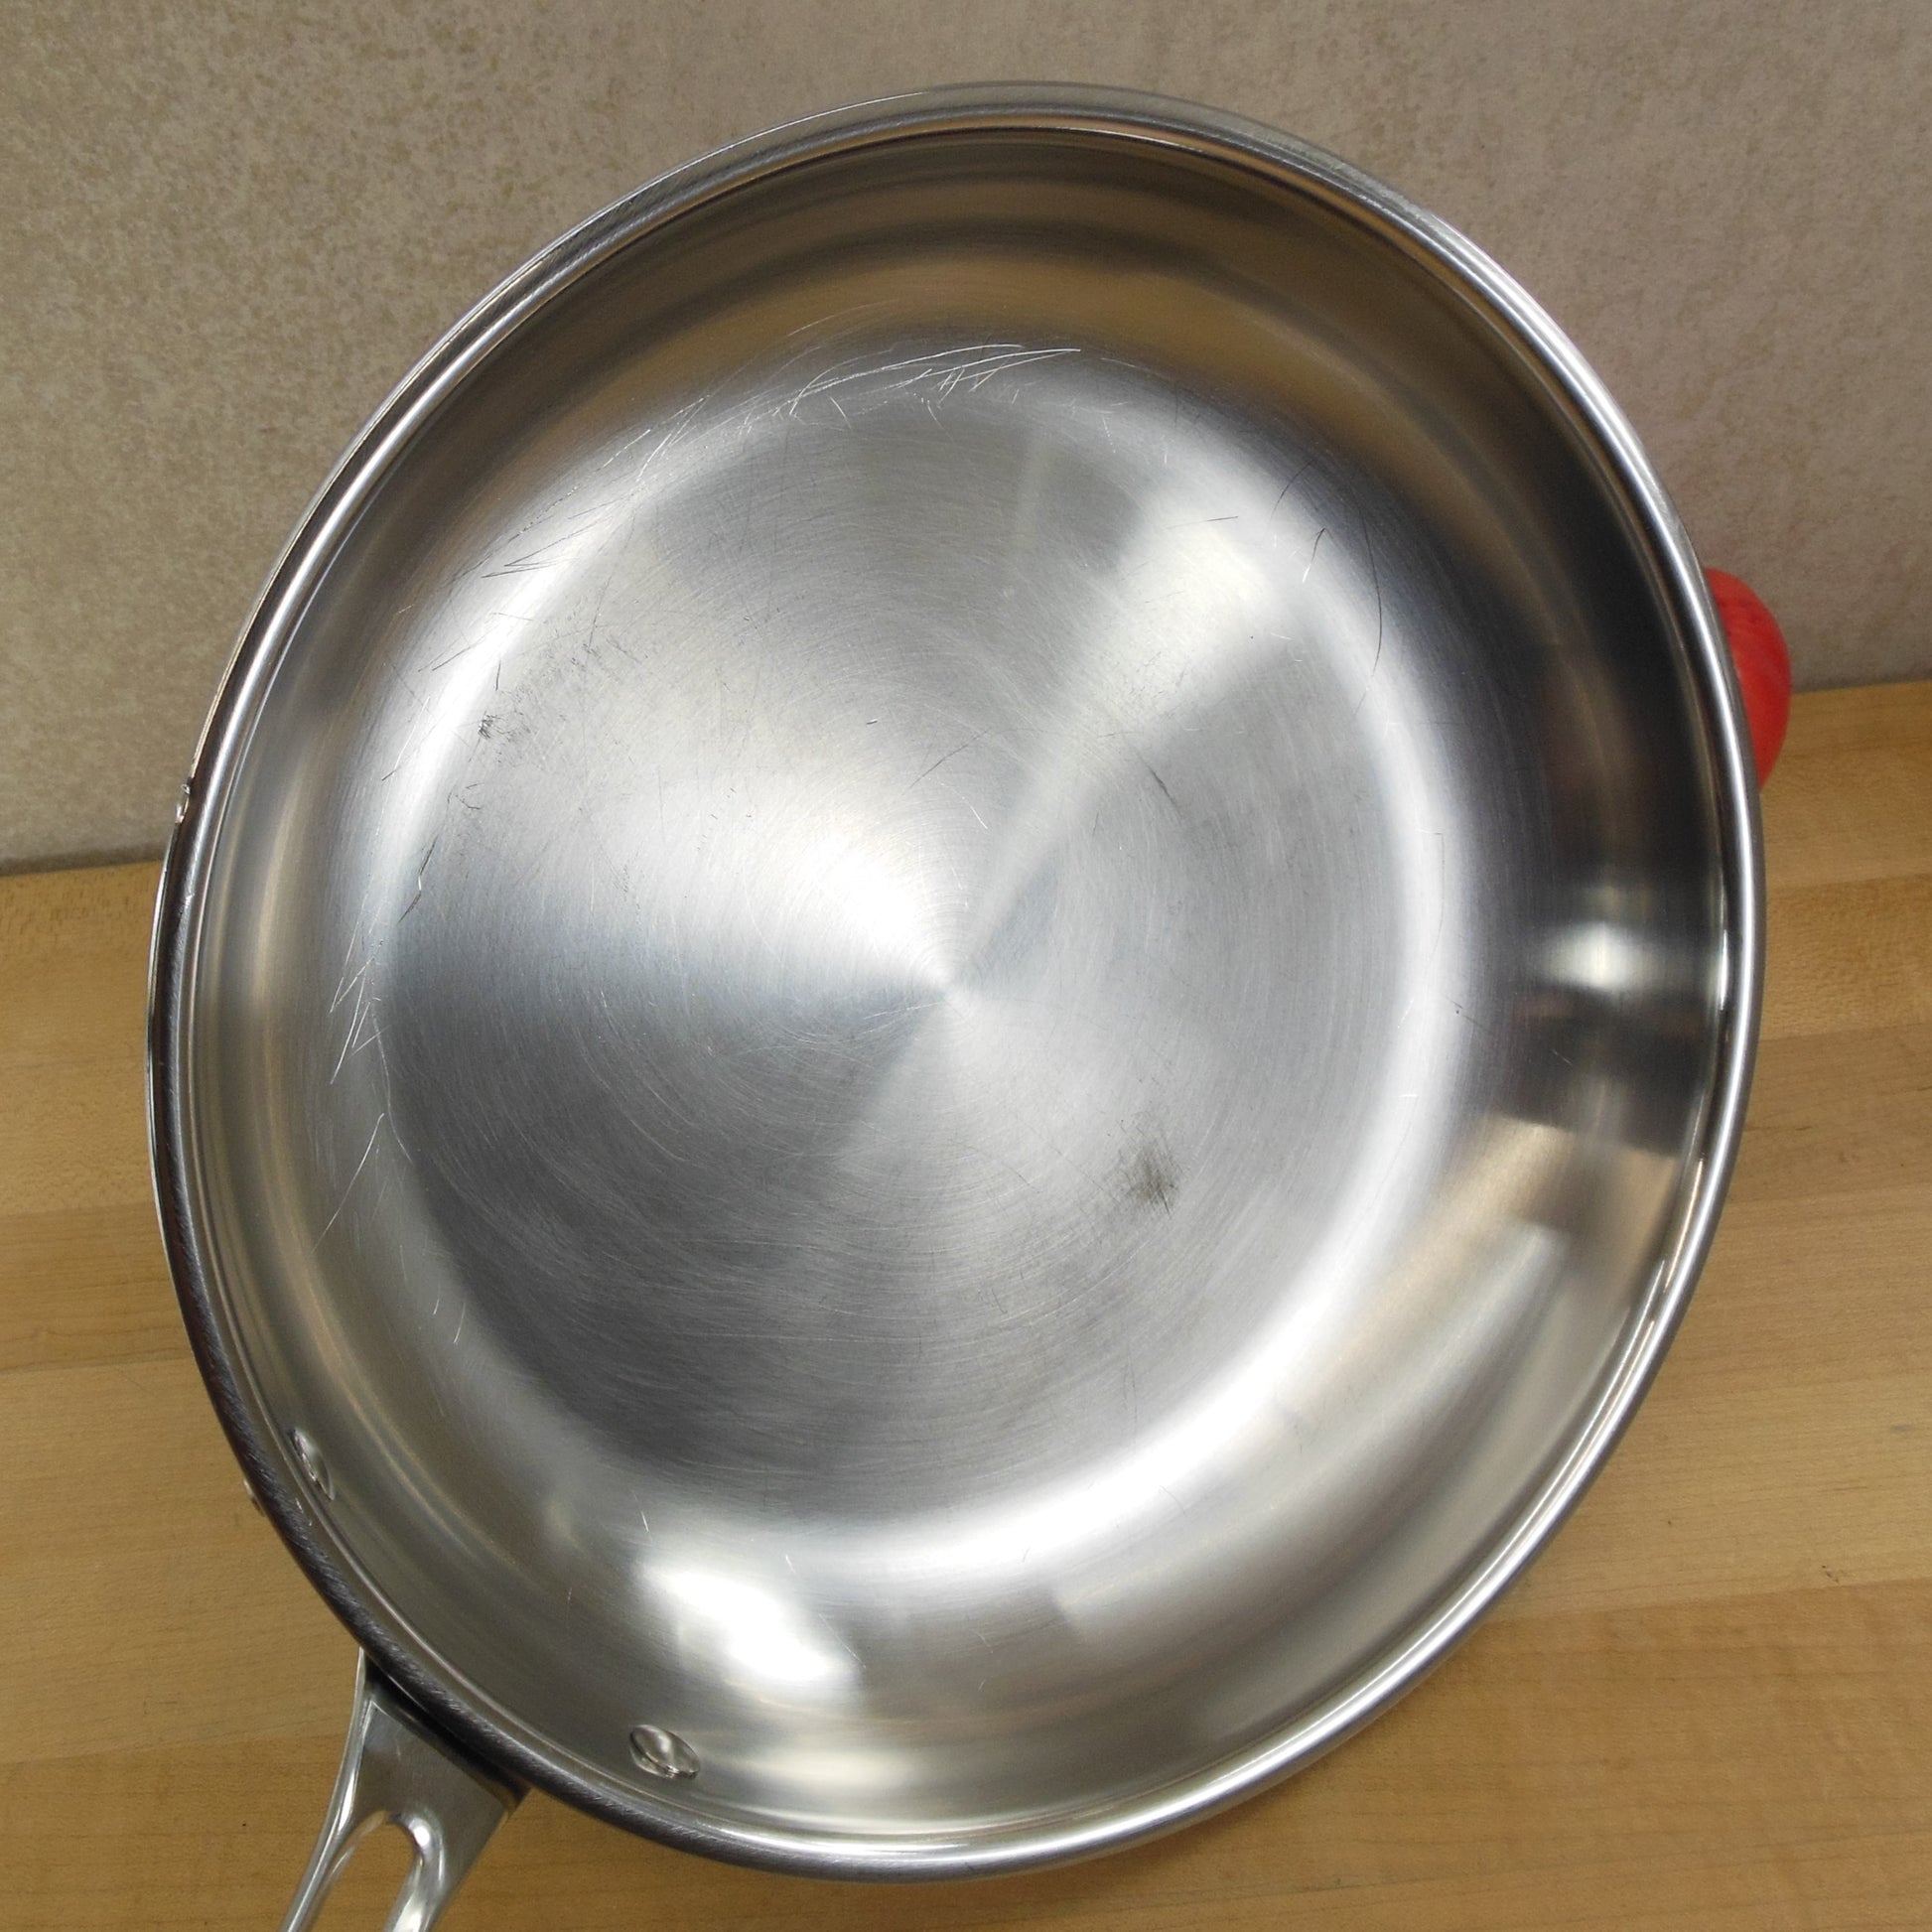 Viking Culinary 10" 3-Ply 18/8 Stainless Steel Skillet Fry Pan used